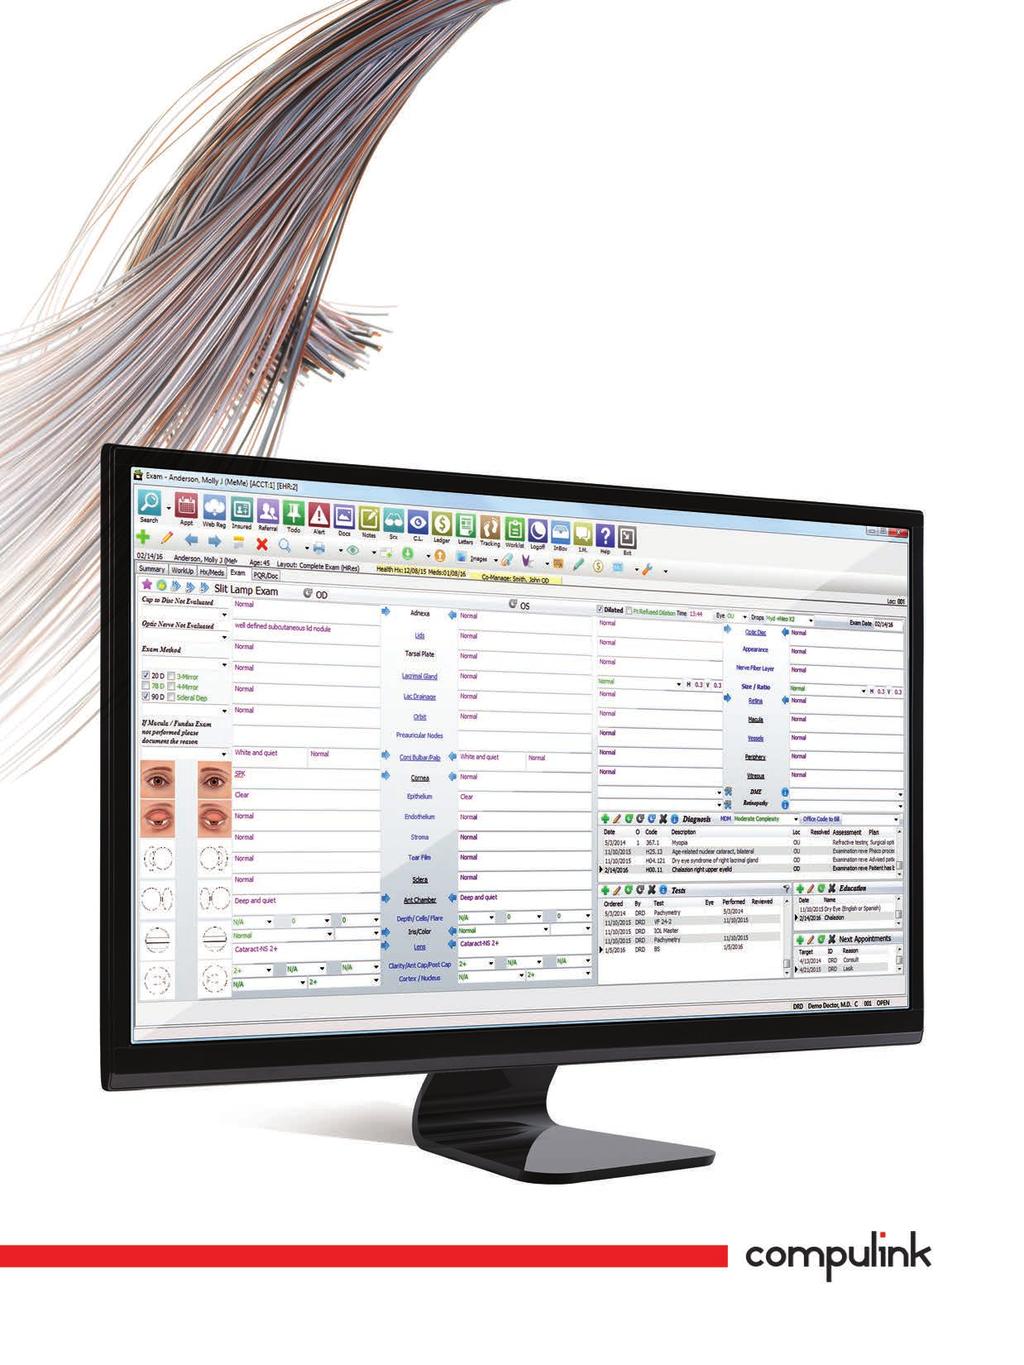 FAST EASY EFFICIENT ENTERPRISE PROVEN OneTab EHR streamline your exams Document the entire exam from a single screen The EHR used by more ophthalmologists Complete, all-in-one database solution: EHR,